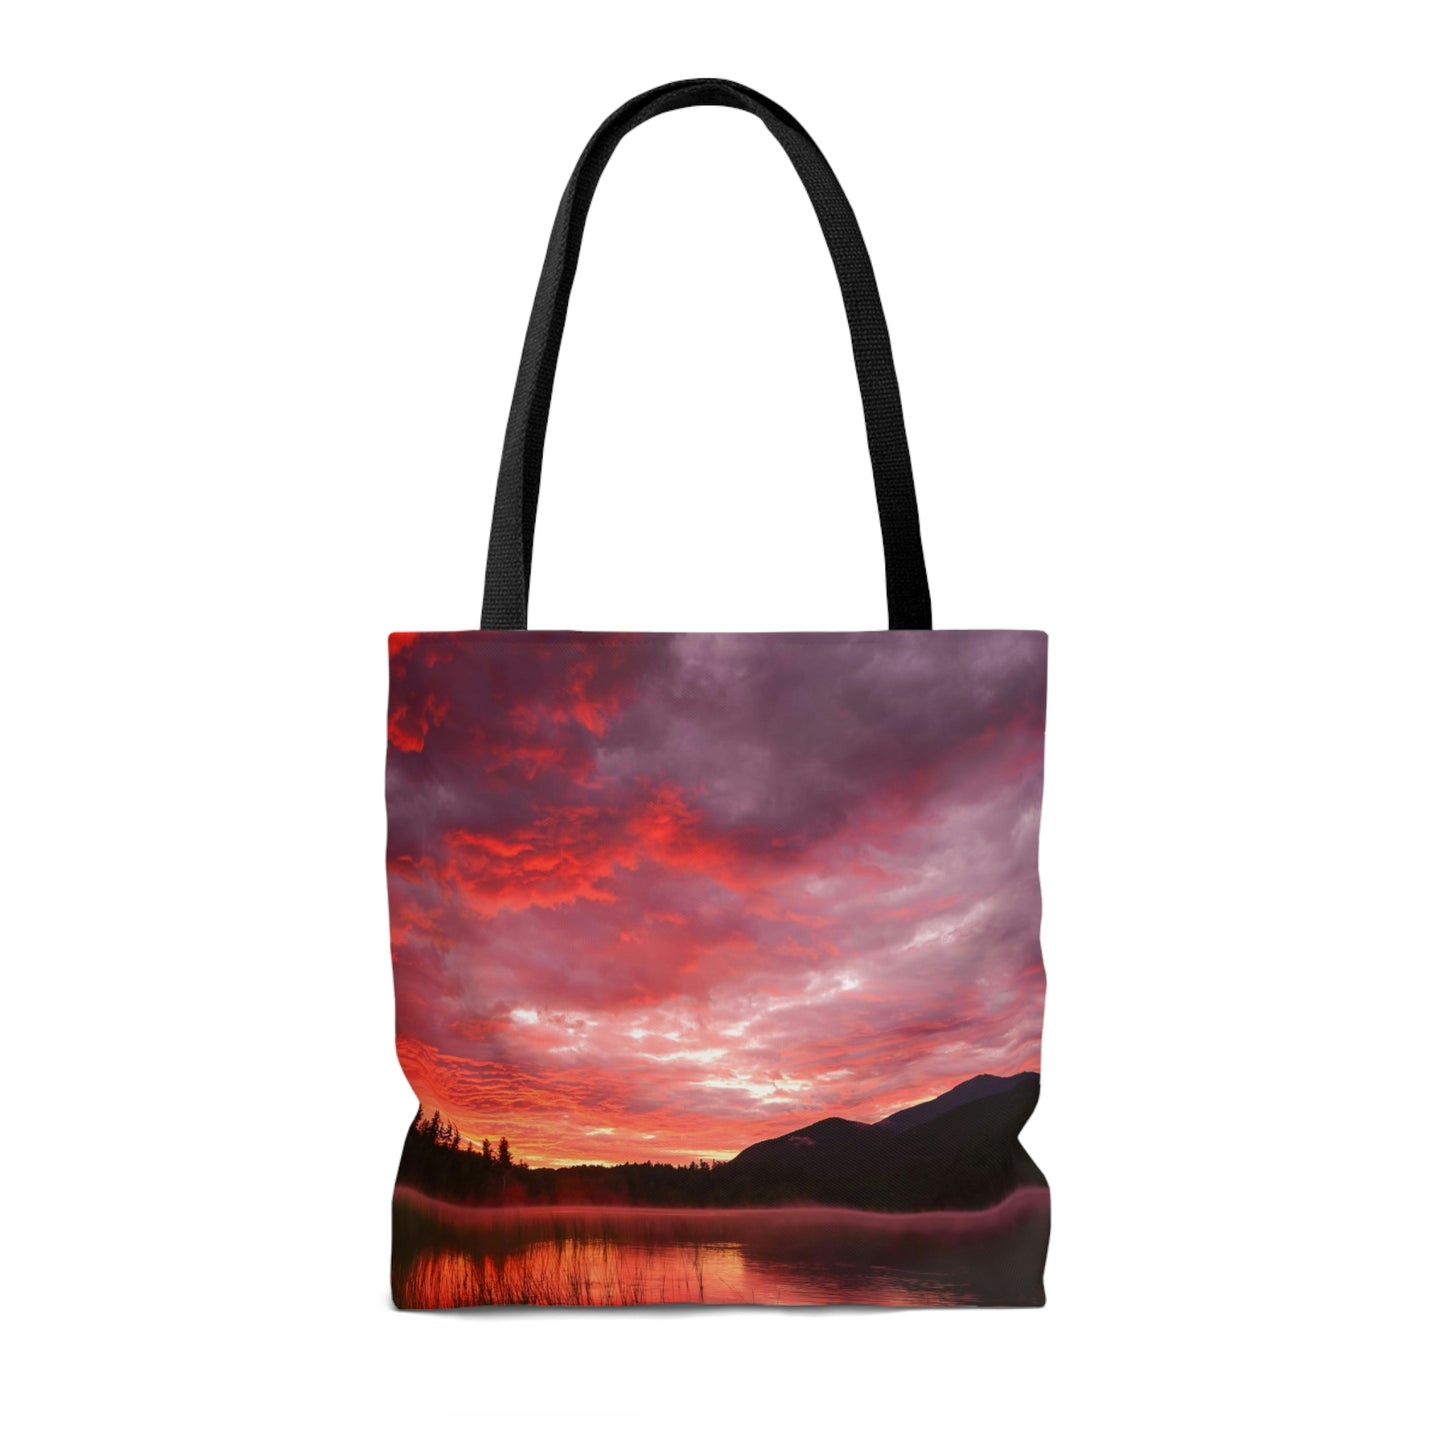 Tote Bag - Fire in the Sky, Connery Pond